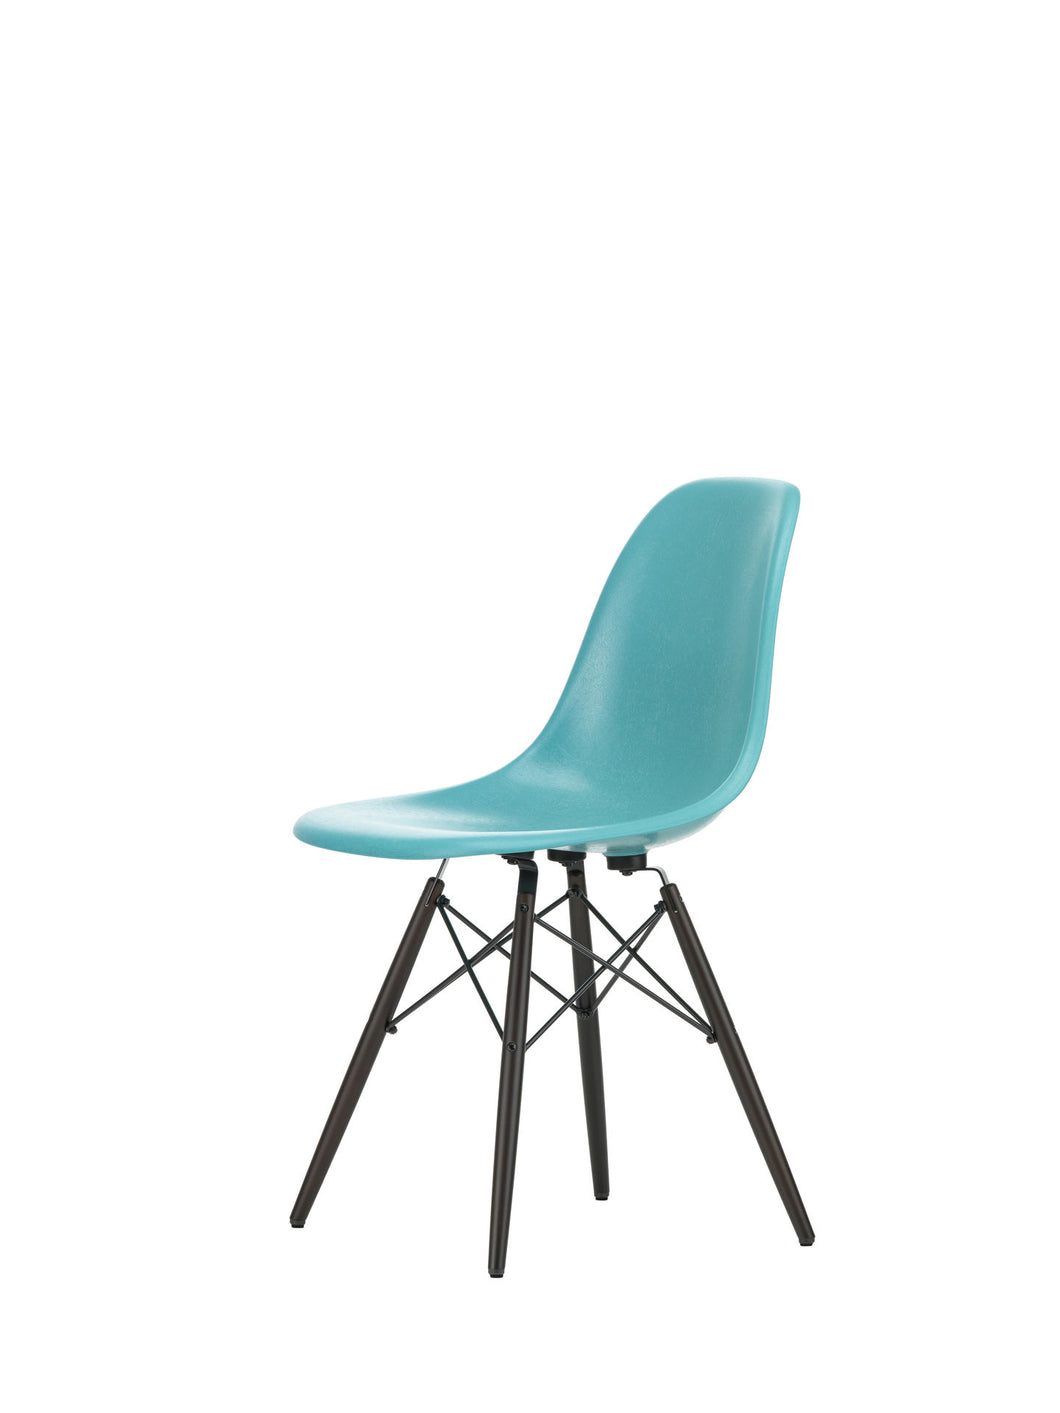 Eames Fiberglass Chair DSW Limited Edition turquoise